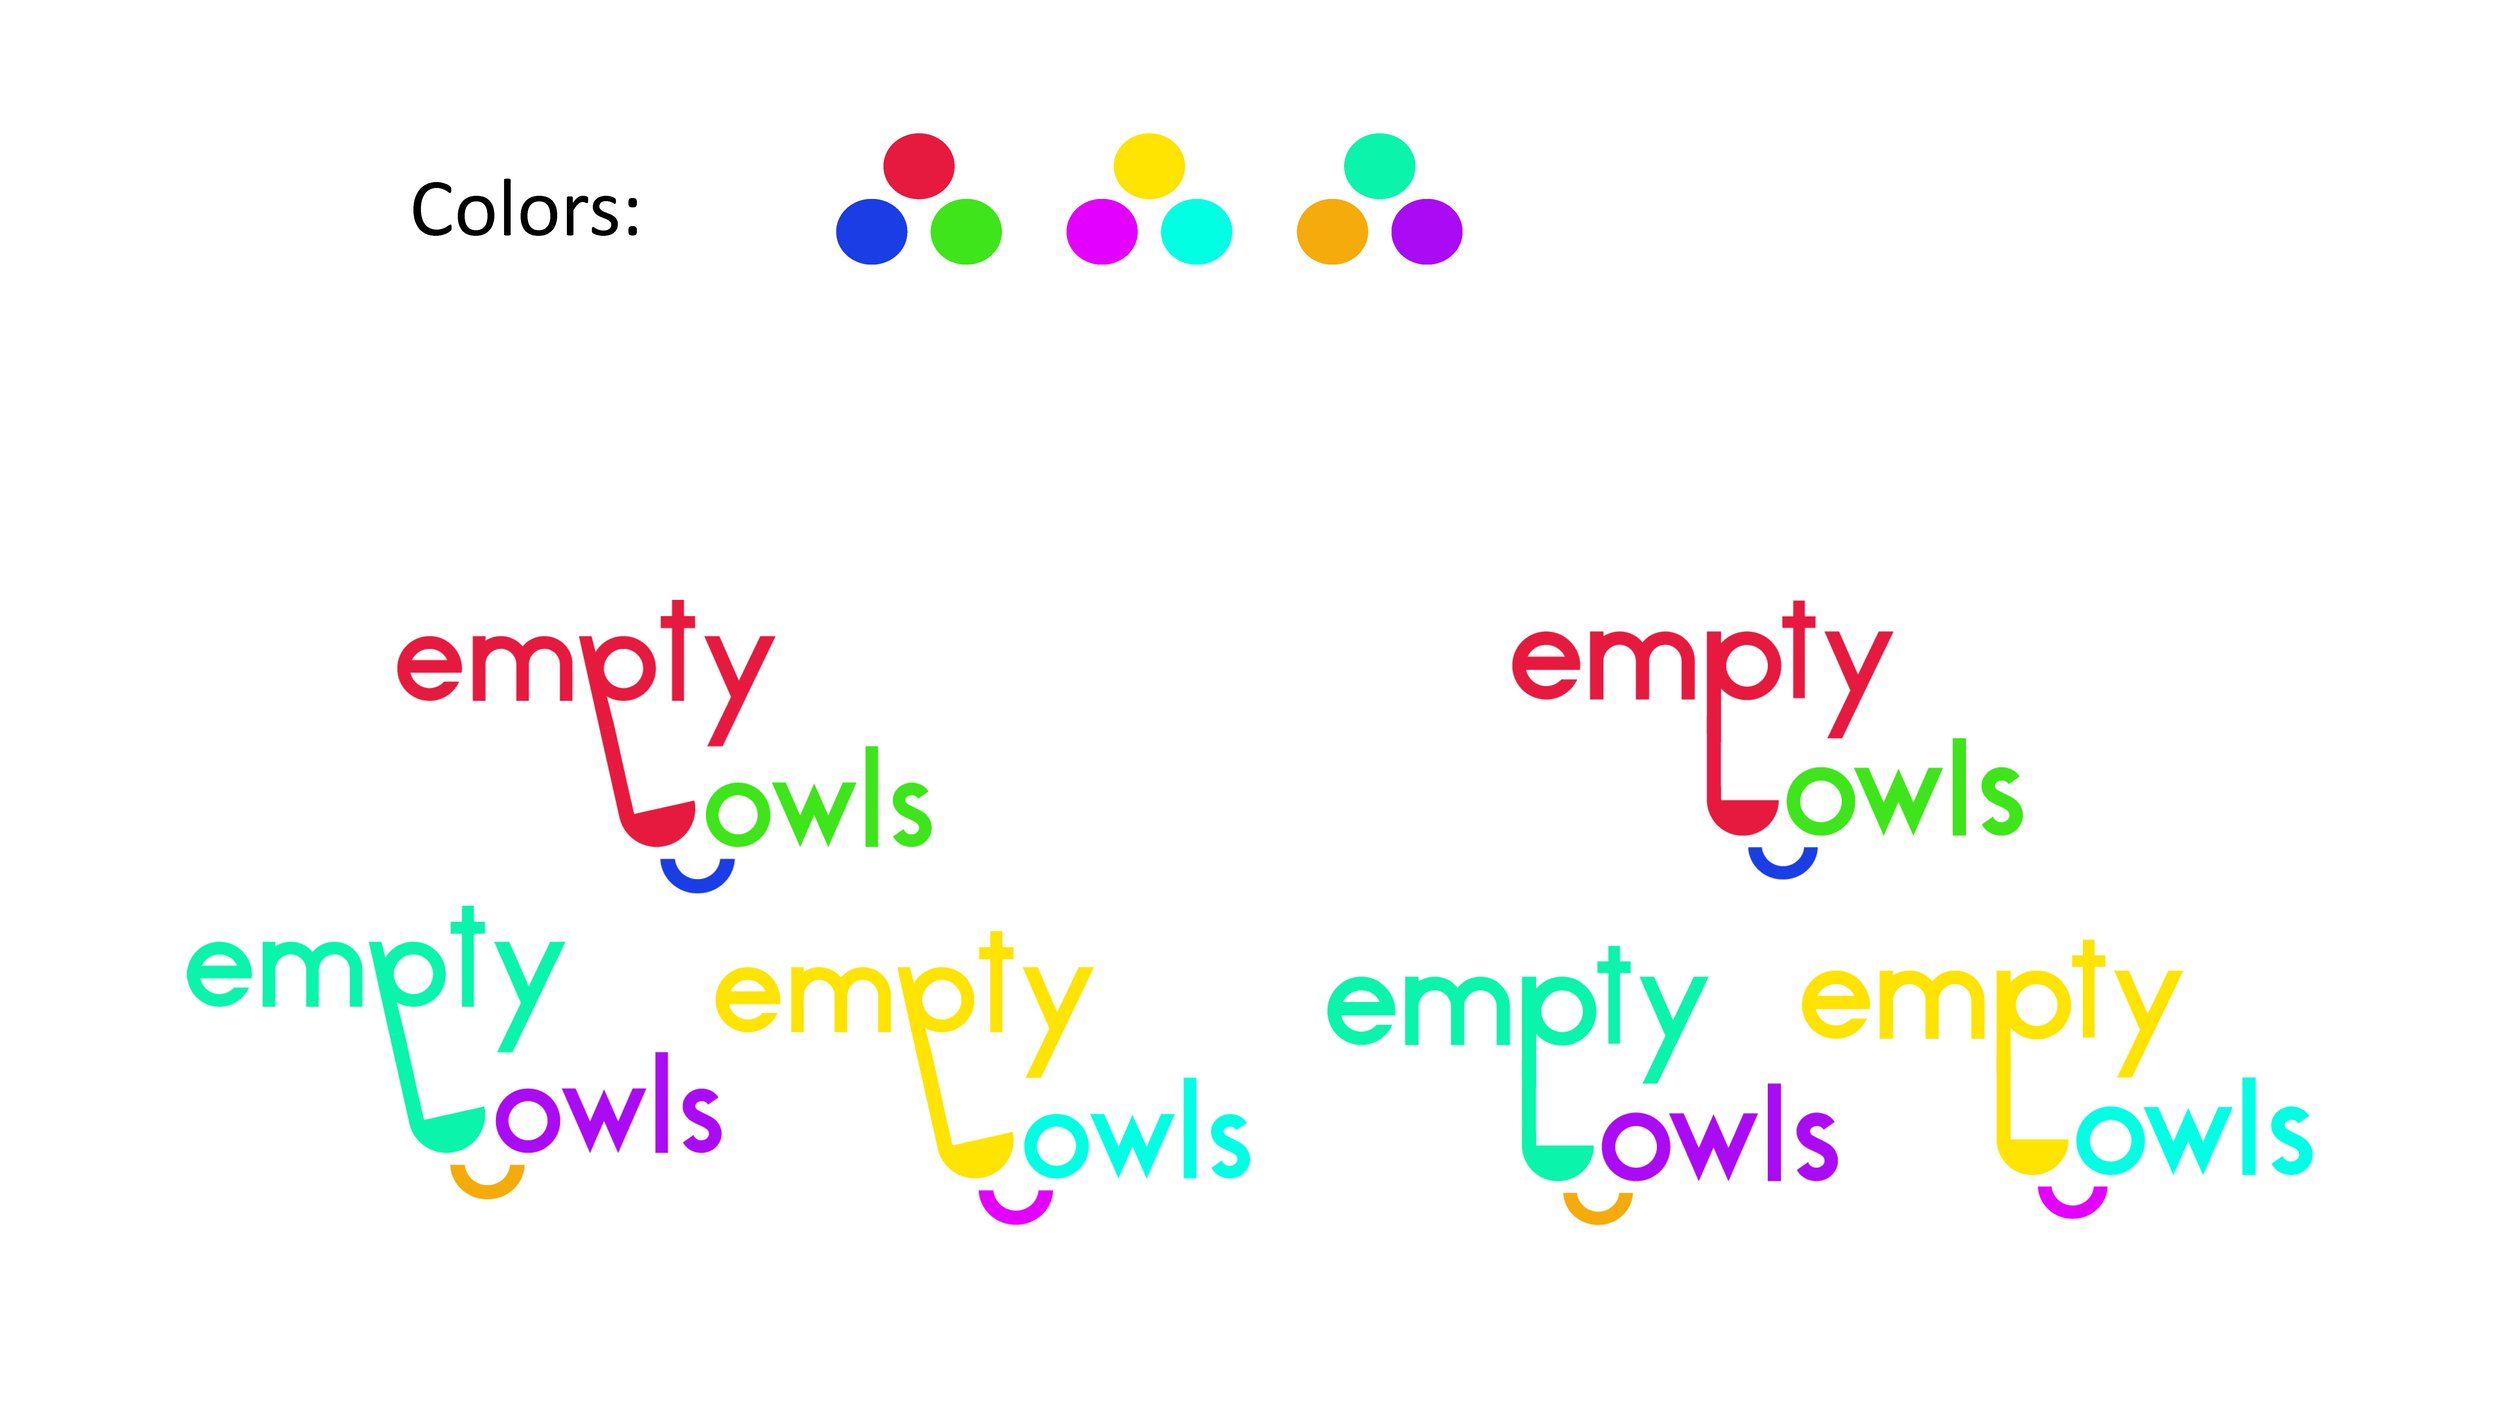 Refined Empty Bowls Logos_Page_4.jpg